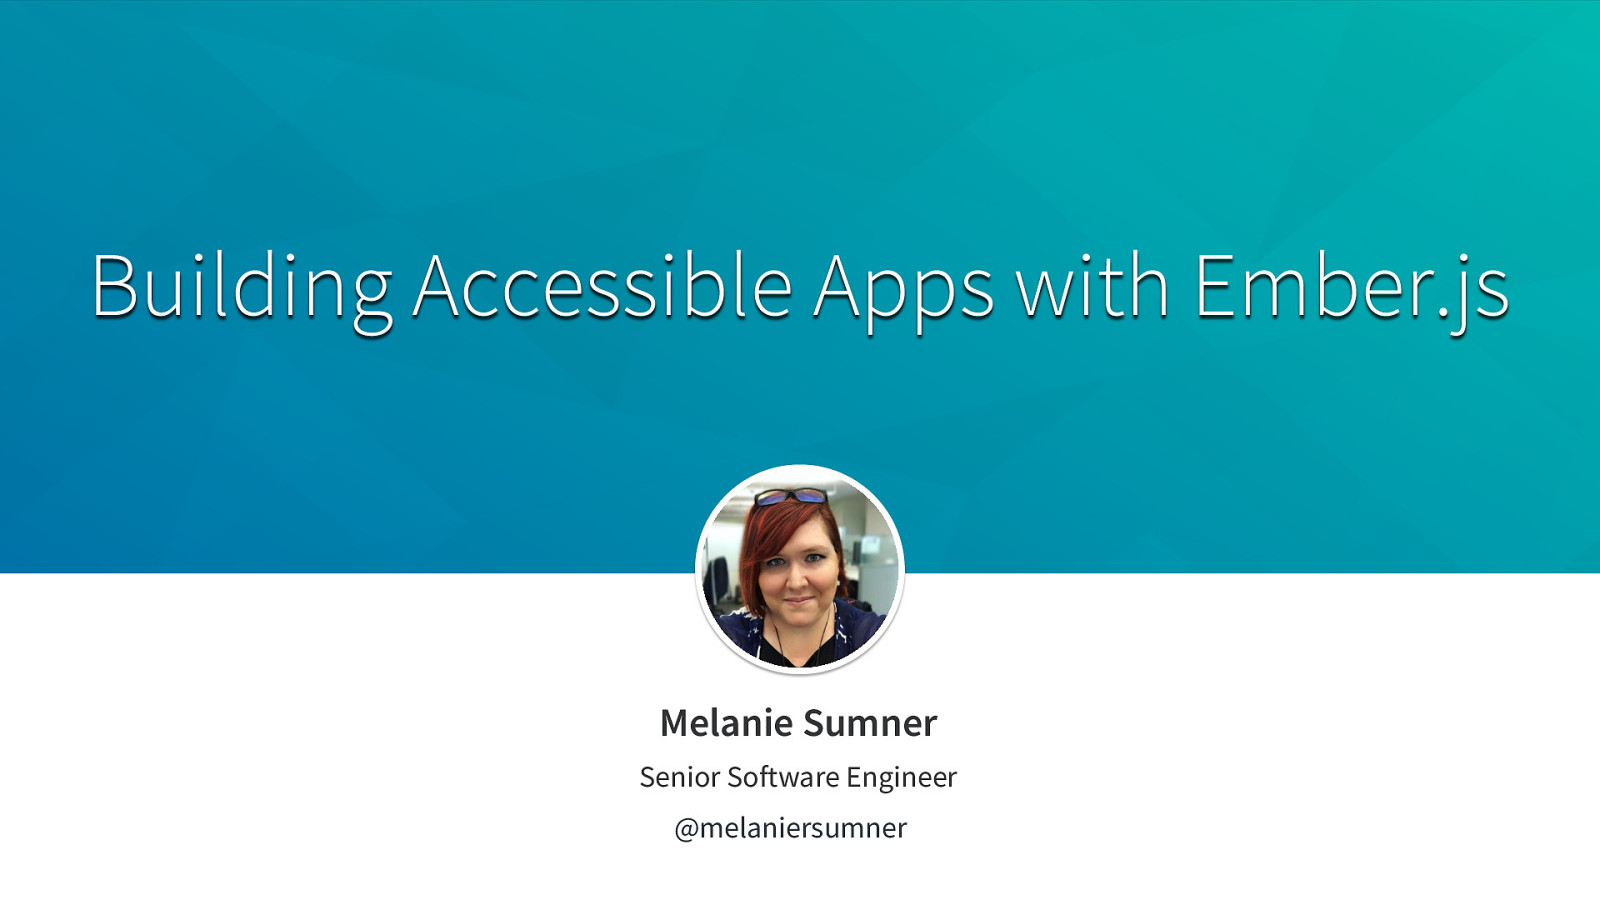 Building Accessible Apps with Ember.js